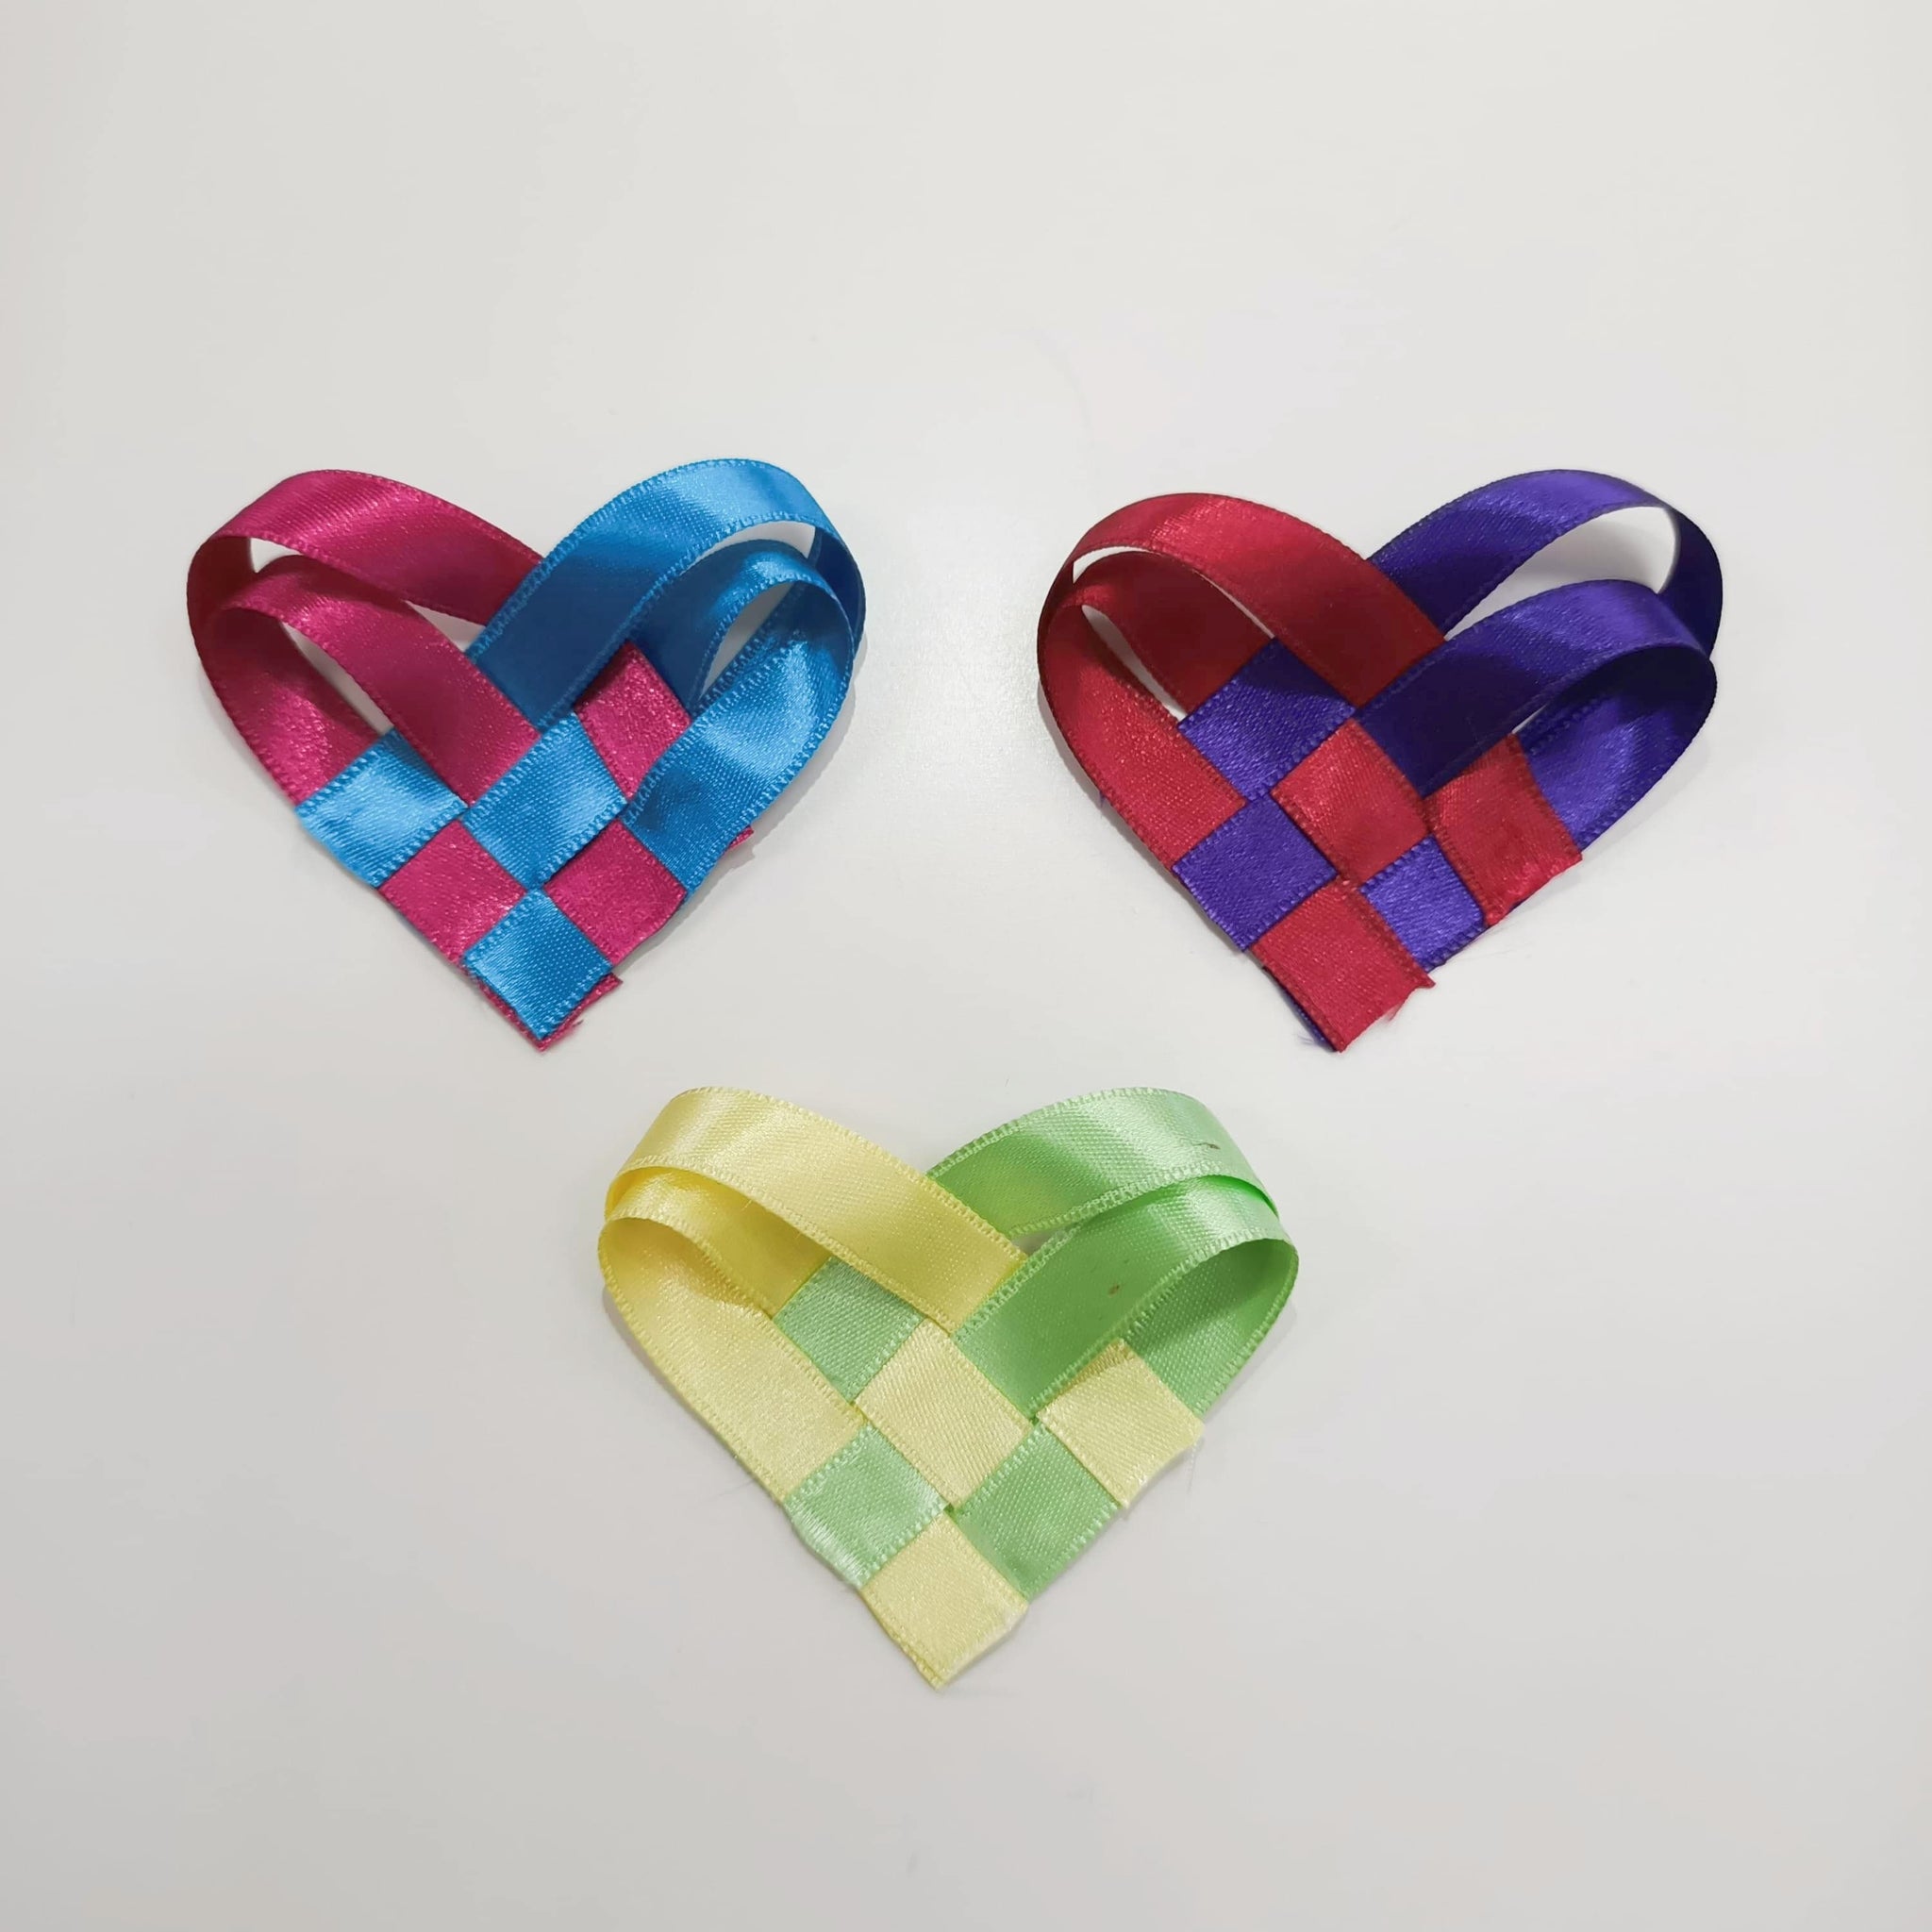 Woven Heart Ribbon Valentines Day Craft DIY